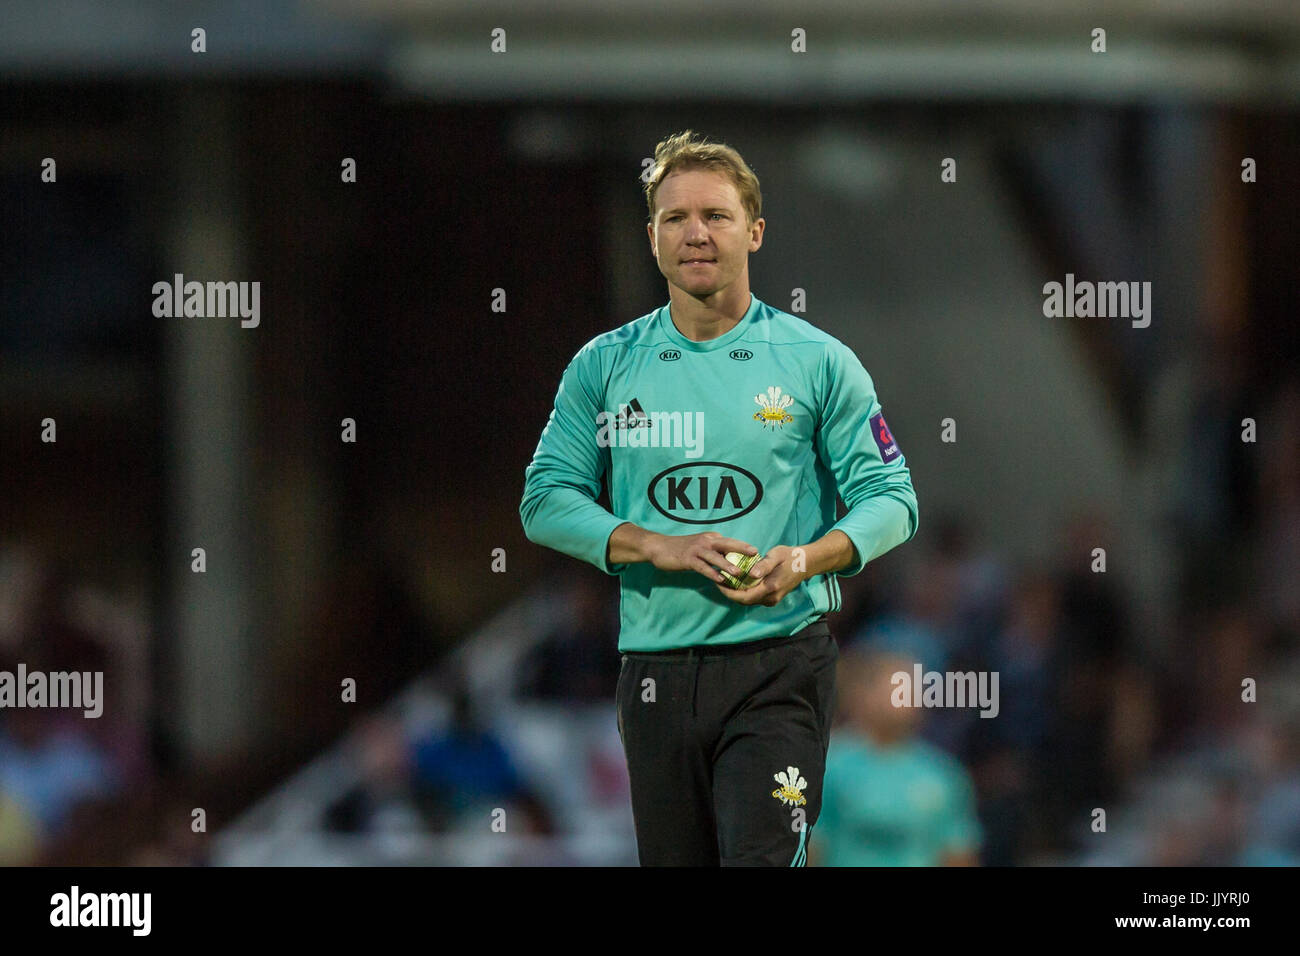 London, UK. 21 July, 2017. Gareth Batty bowling for Surrey against Middlesex in the NatWest T20 Blast match at the Kia Oval. David Rowe/Alamy Live News Stock Photo